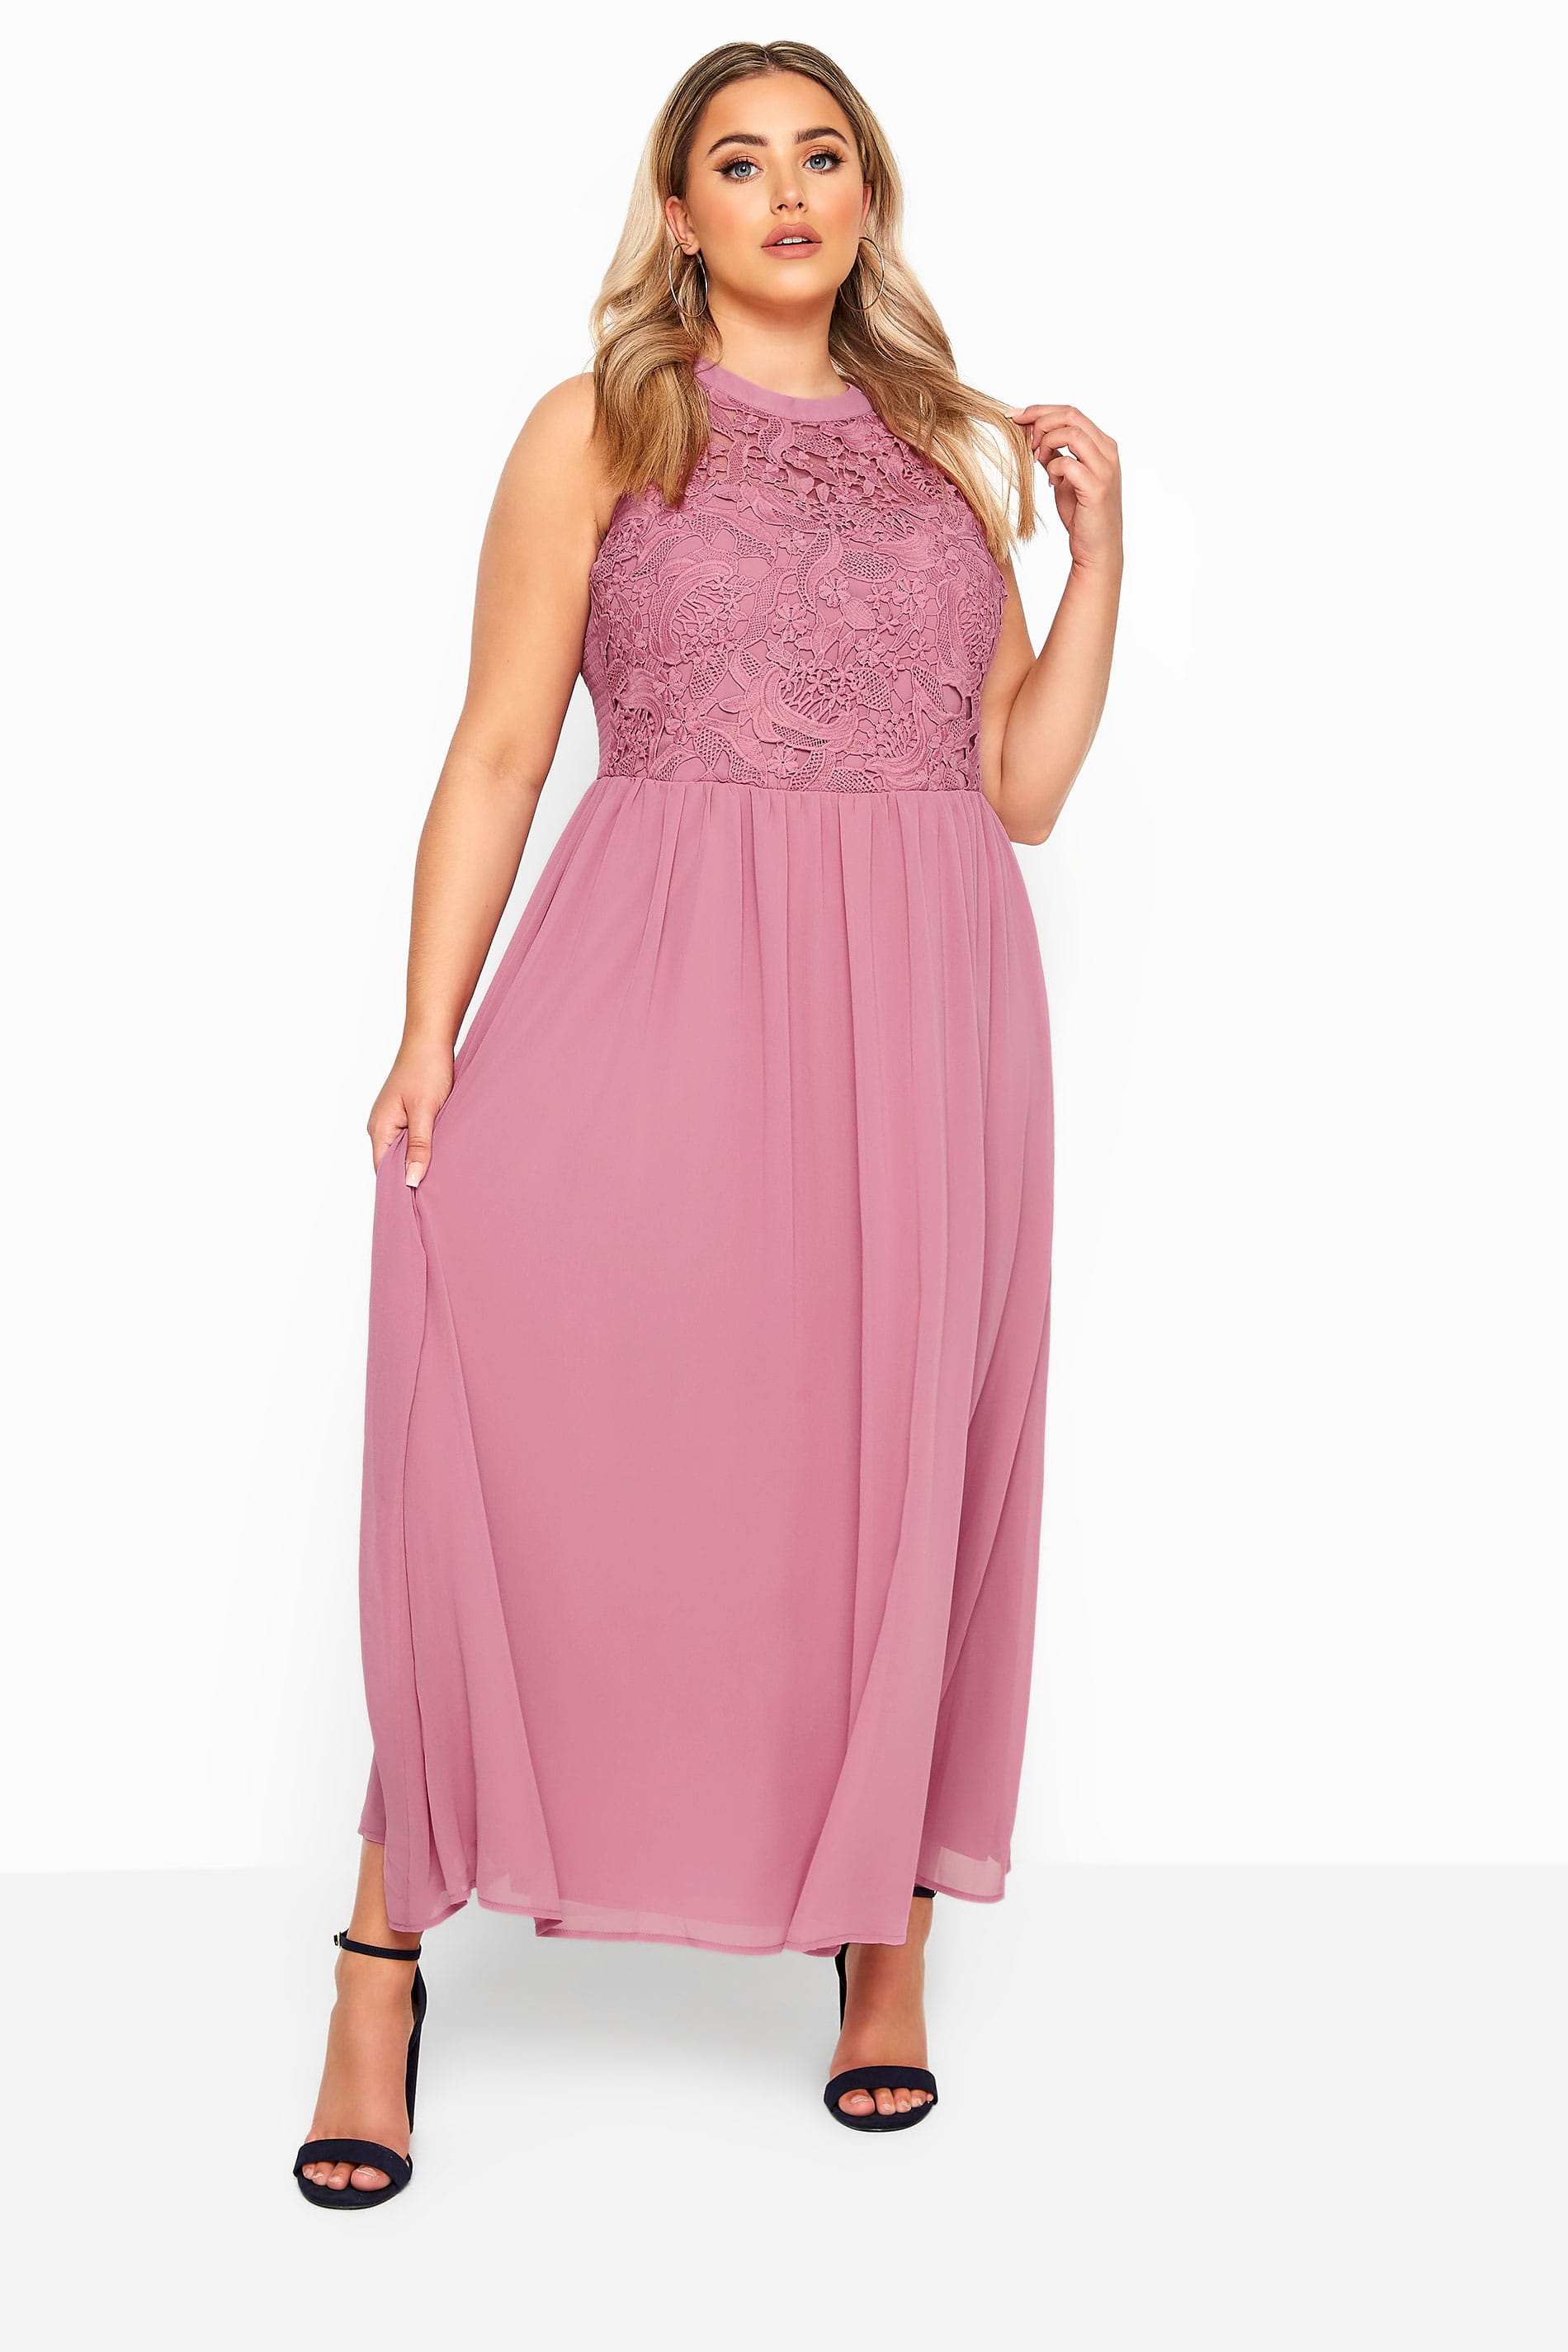 YOURS LONDON Pink Lace Maxi Dress | Yours Clothing